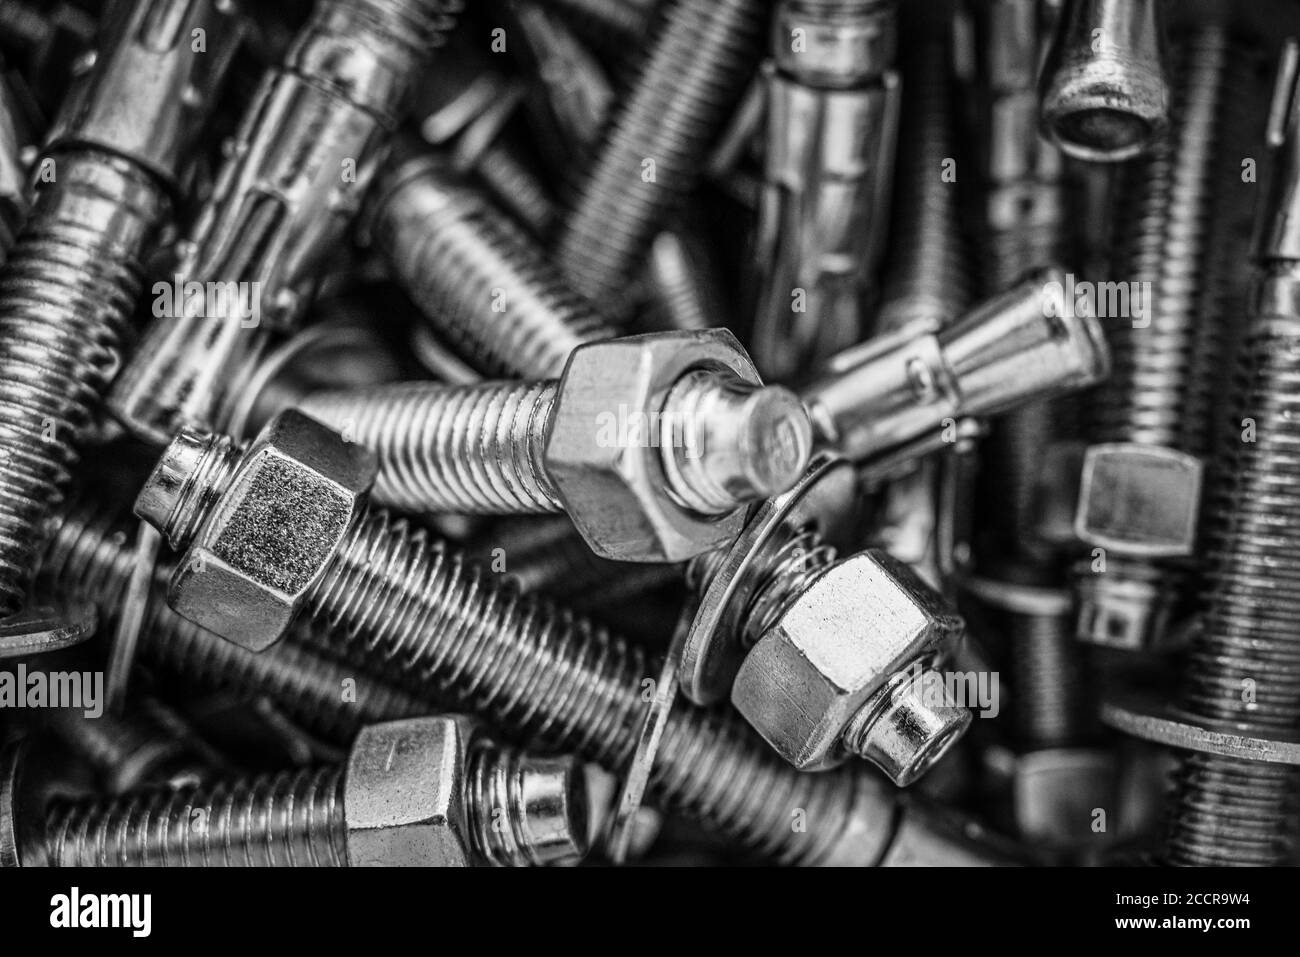 Closeup of Pile of screws and nuts and bolts in a bucket Stock Photo